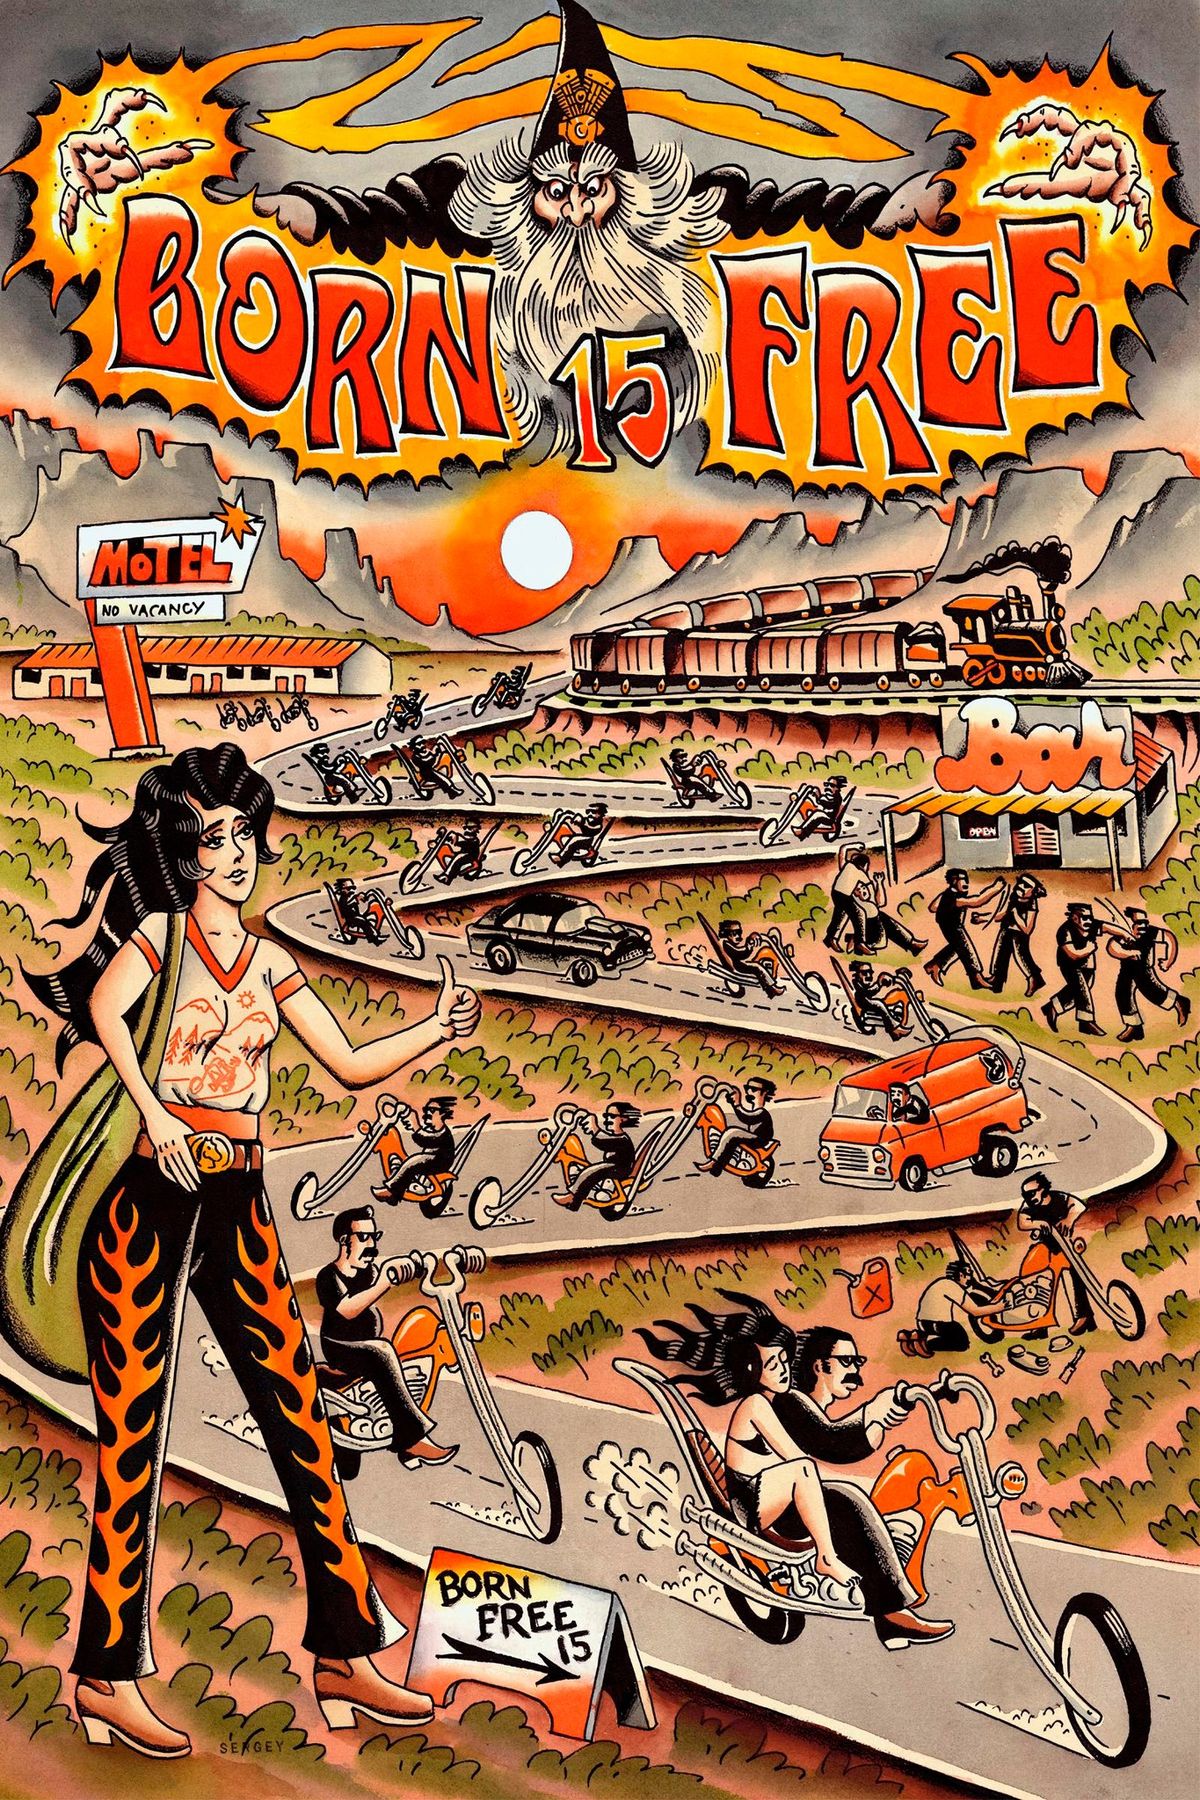 Born-Free 15 Motorcycle Show 